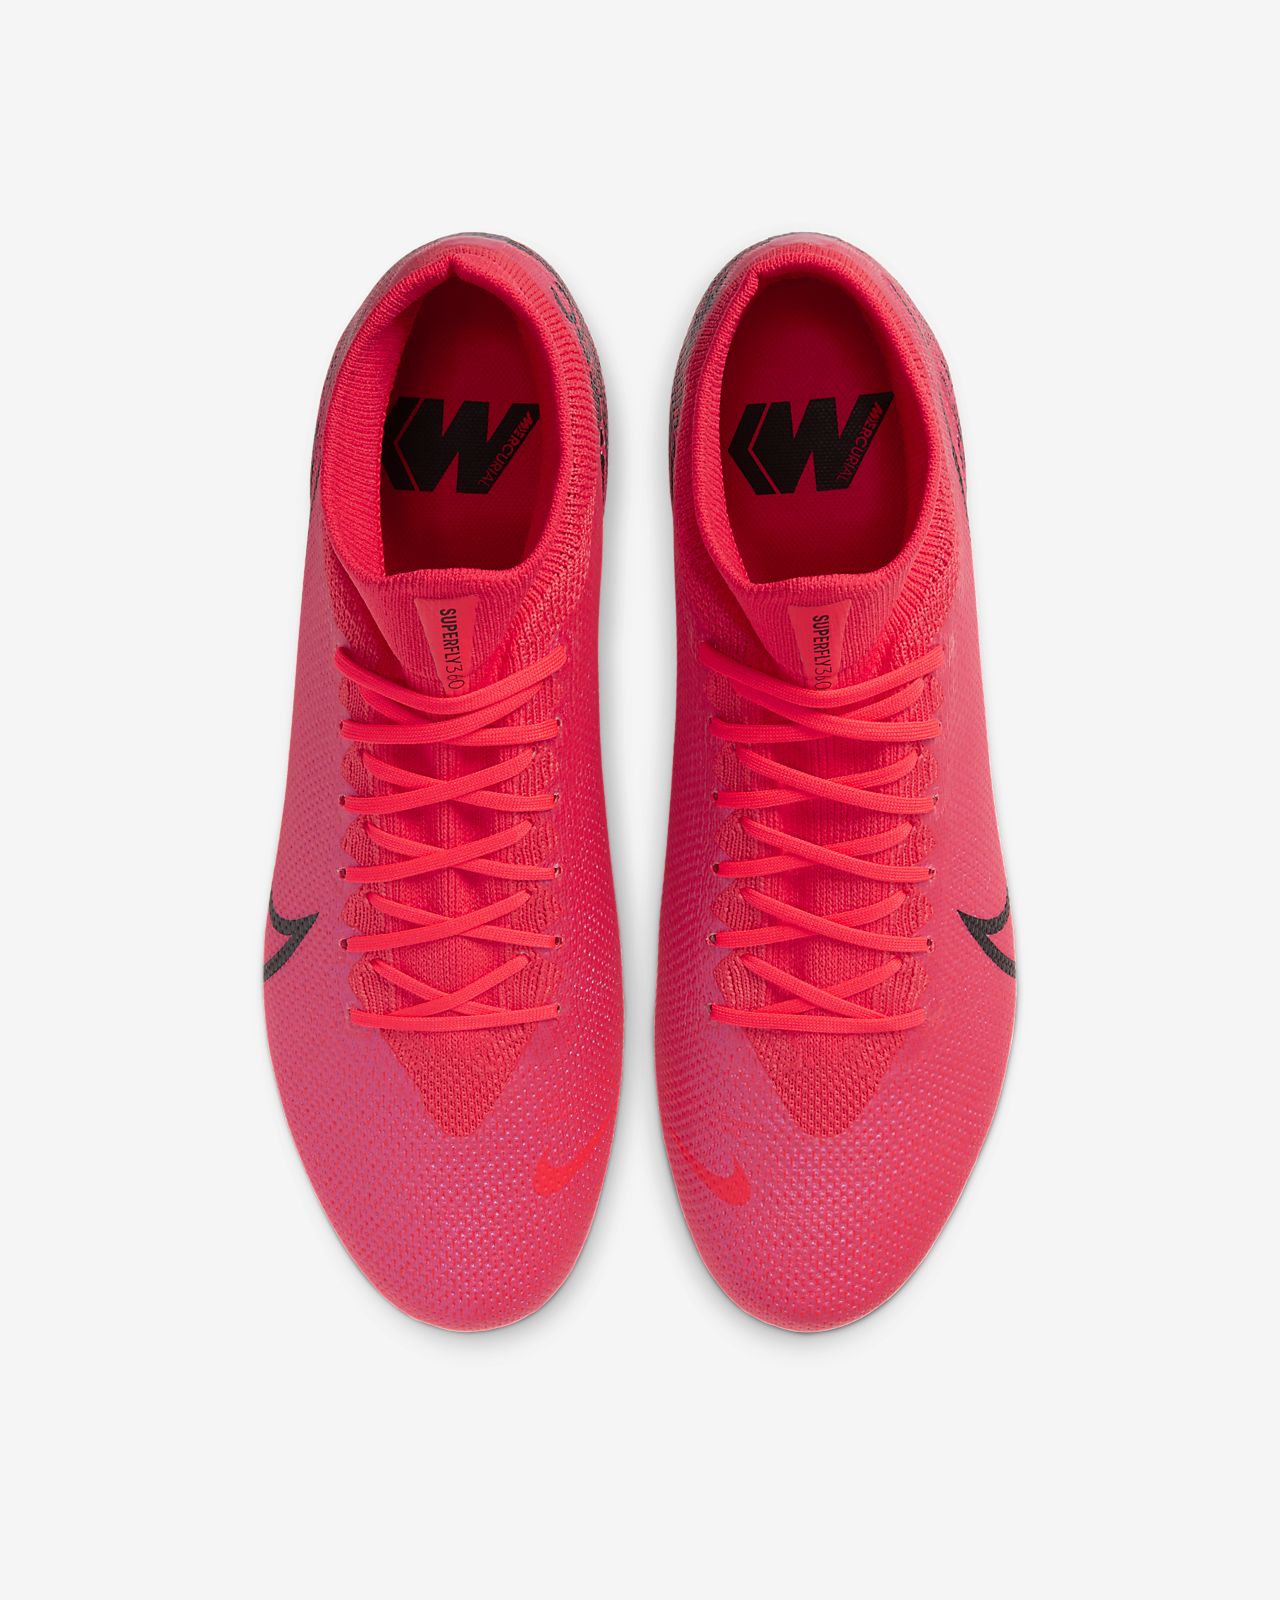 AWESOME NEW NIKE MERCURIAL SUPERFLY 7 VAPOR